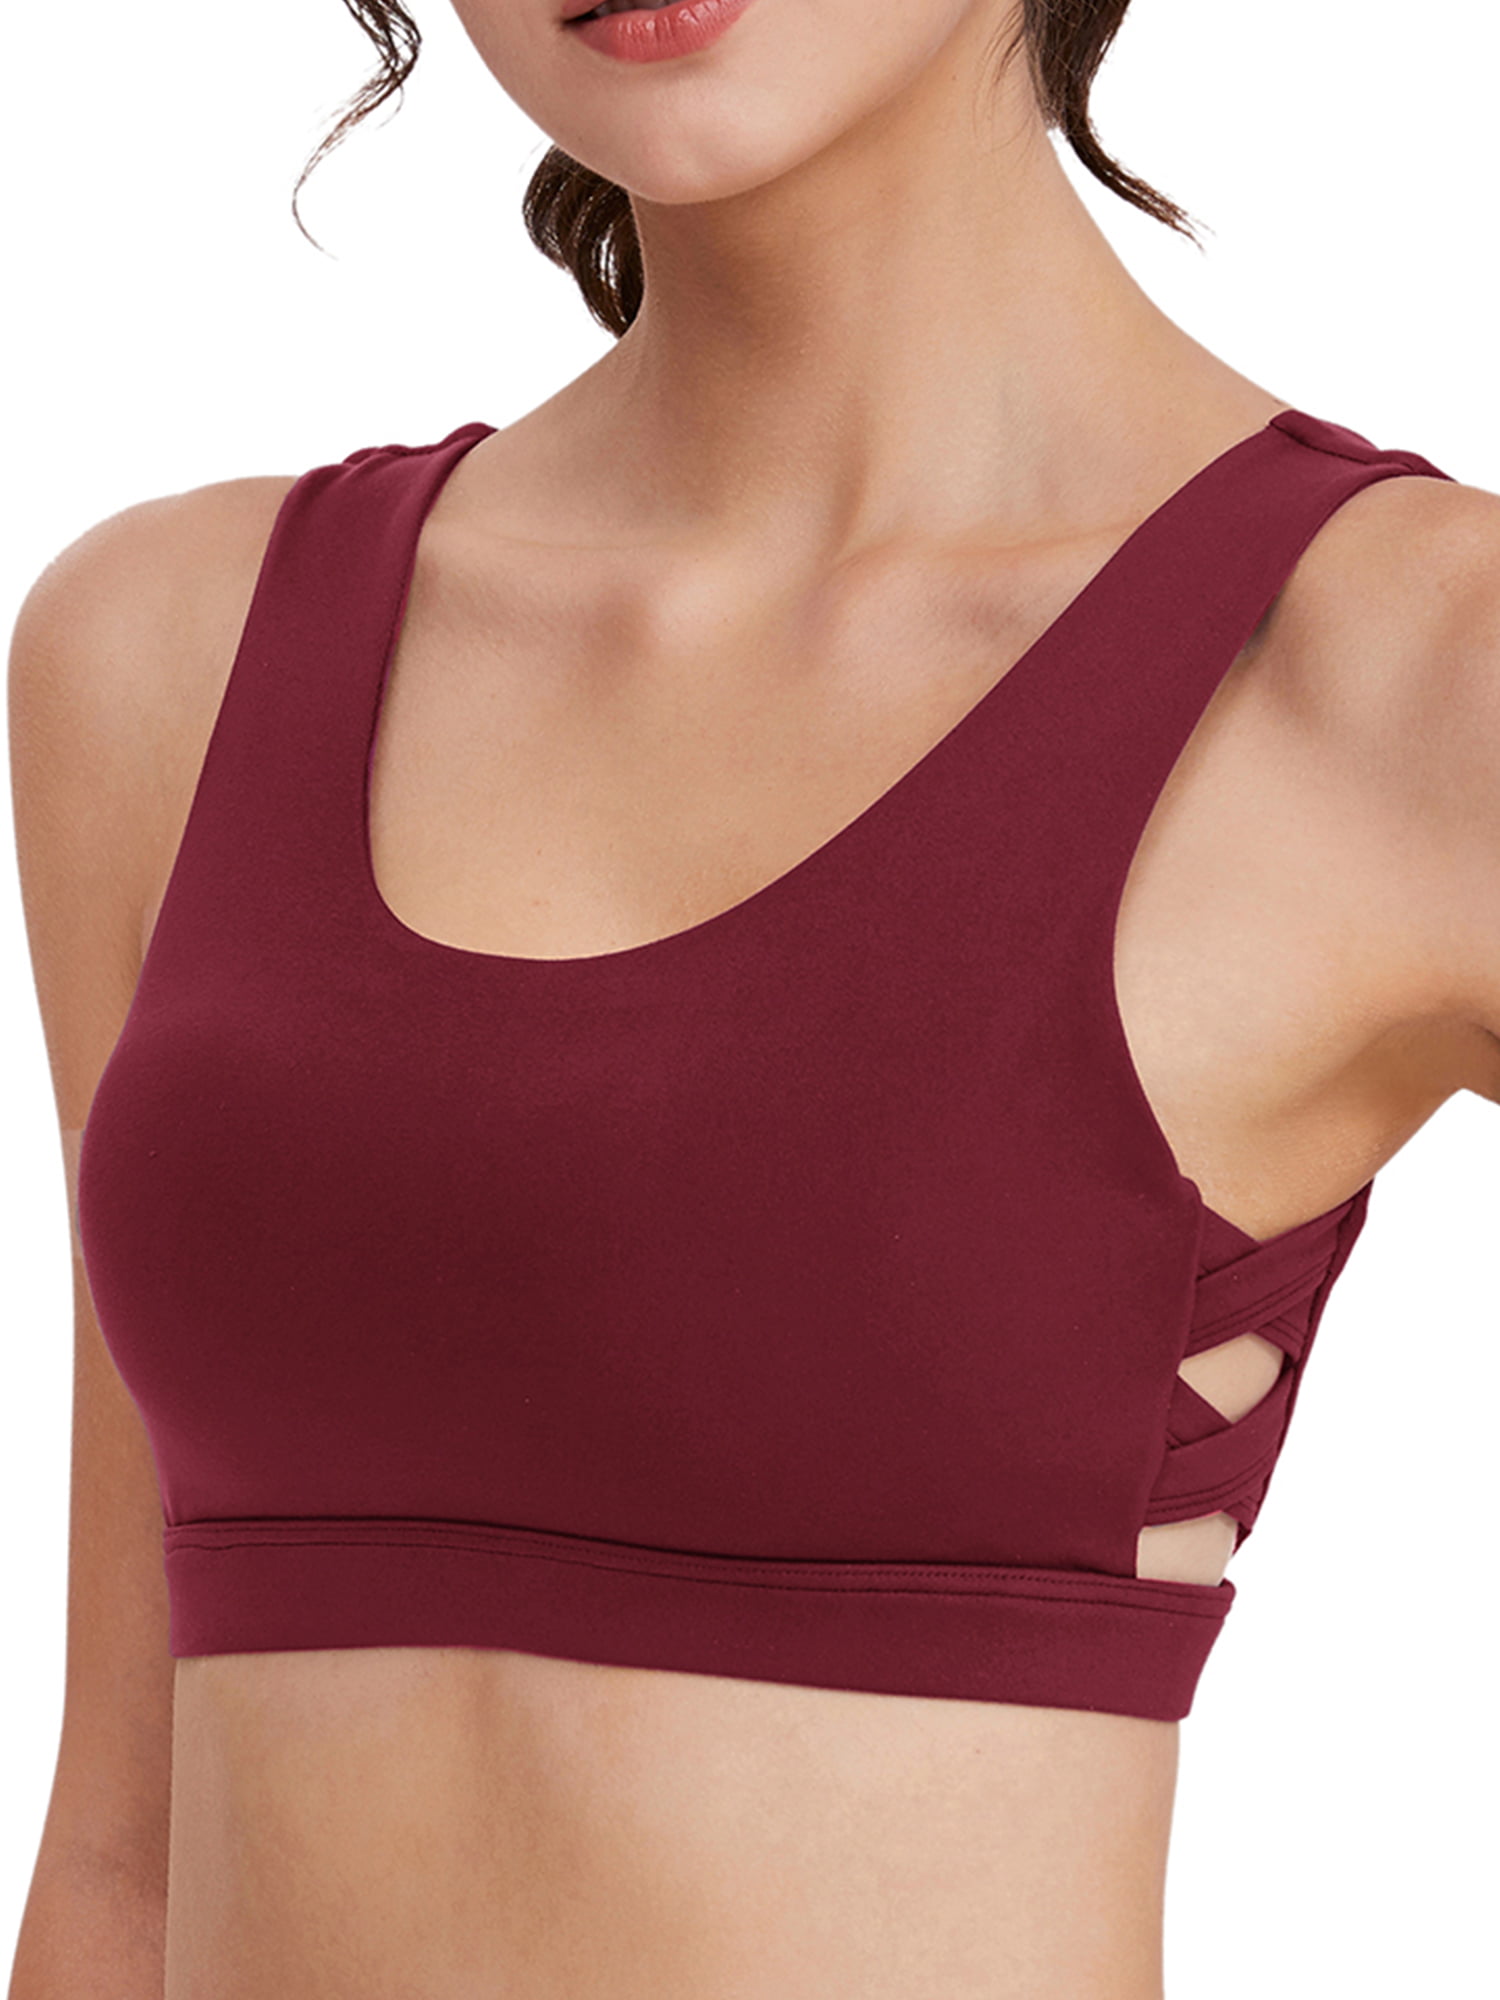 JOYSHAPER Racer Back Seamless Sports Bra Workout Running Fitness Yoga Bra with Removable Cups Pull-Over Support Yoga Bra